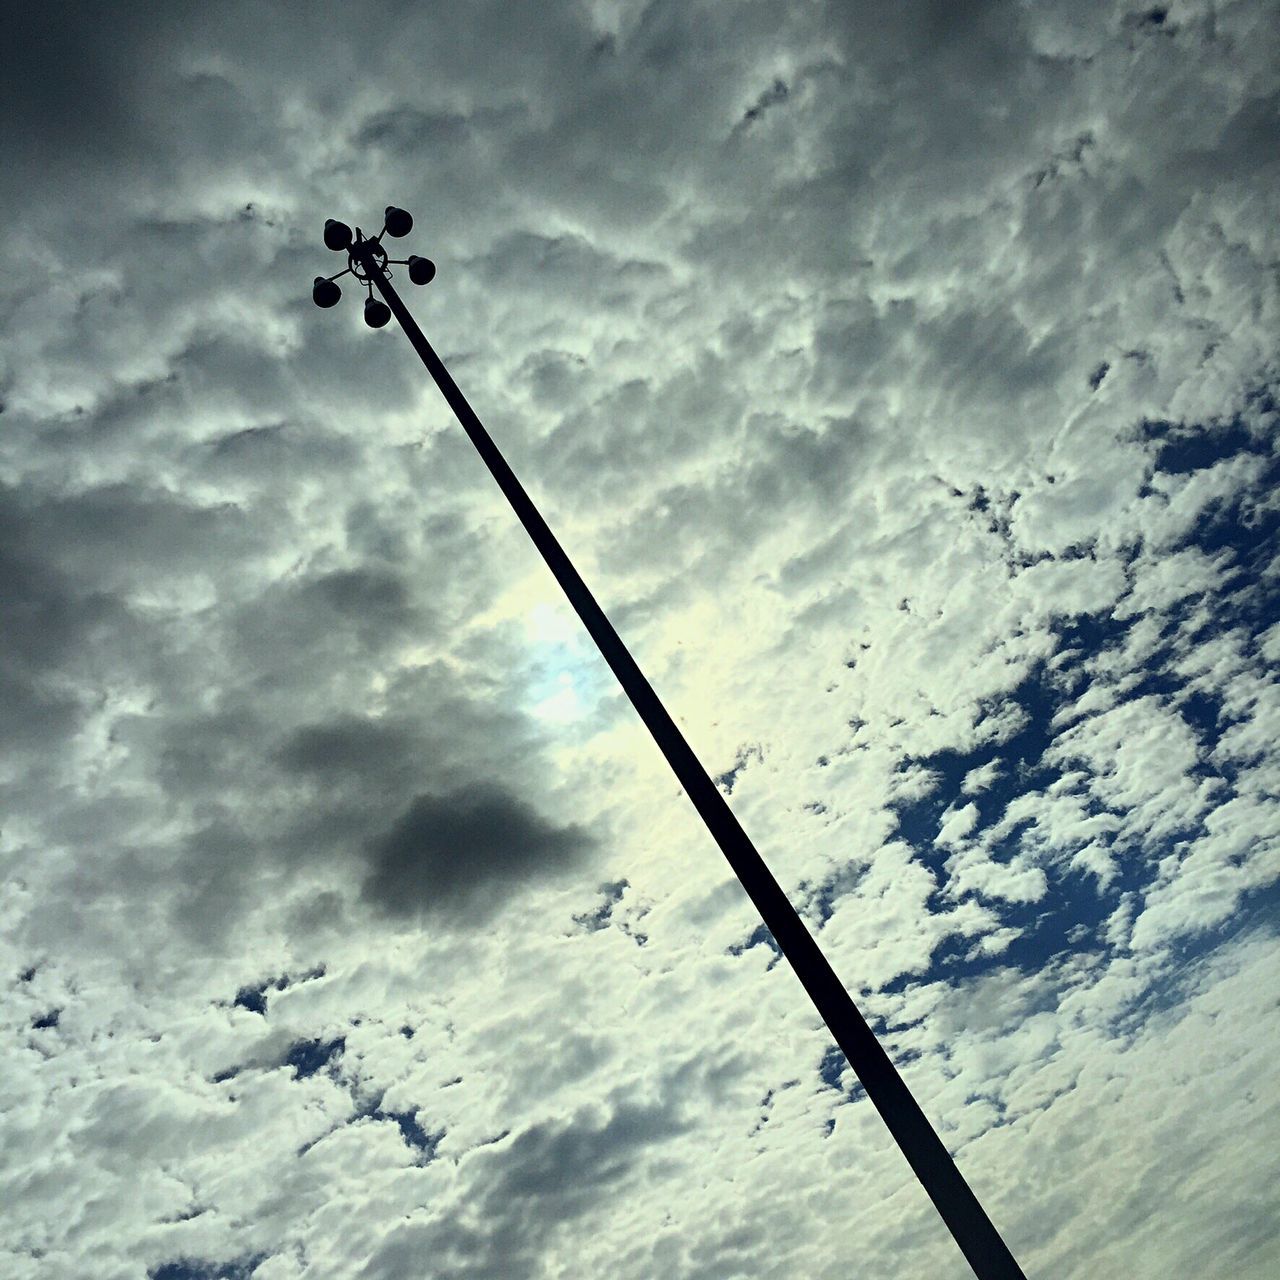 low angle view, sky, cloud - sky, bird, cloudy, power line, cloud, silhouette, cable, electricity, street light, fuel and power generation, animal themes, connection, pole, flock of birds, flying, technology, lighting equipment